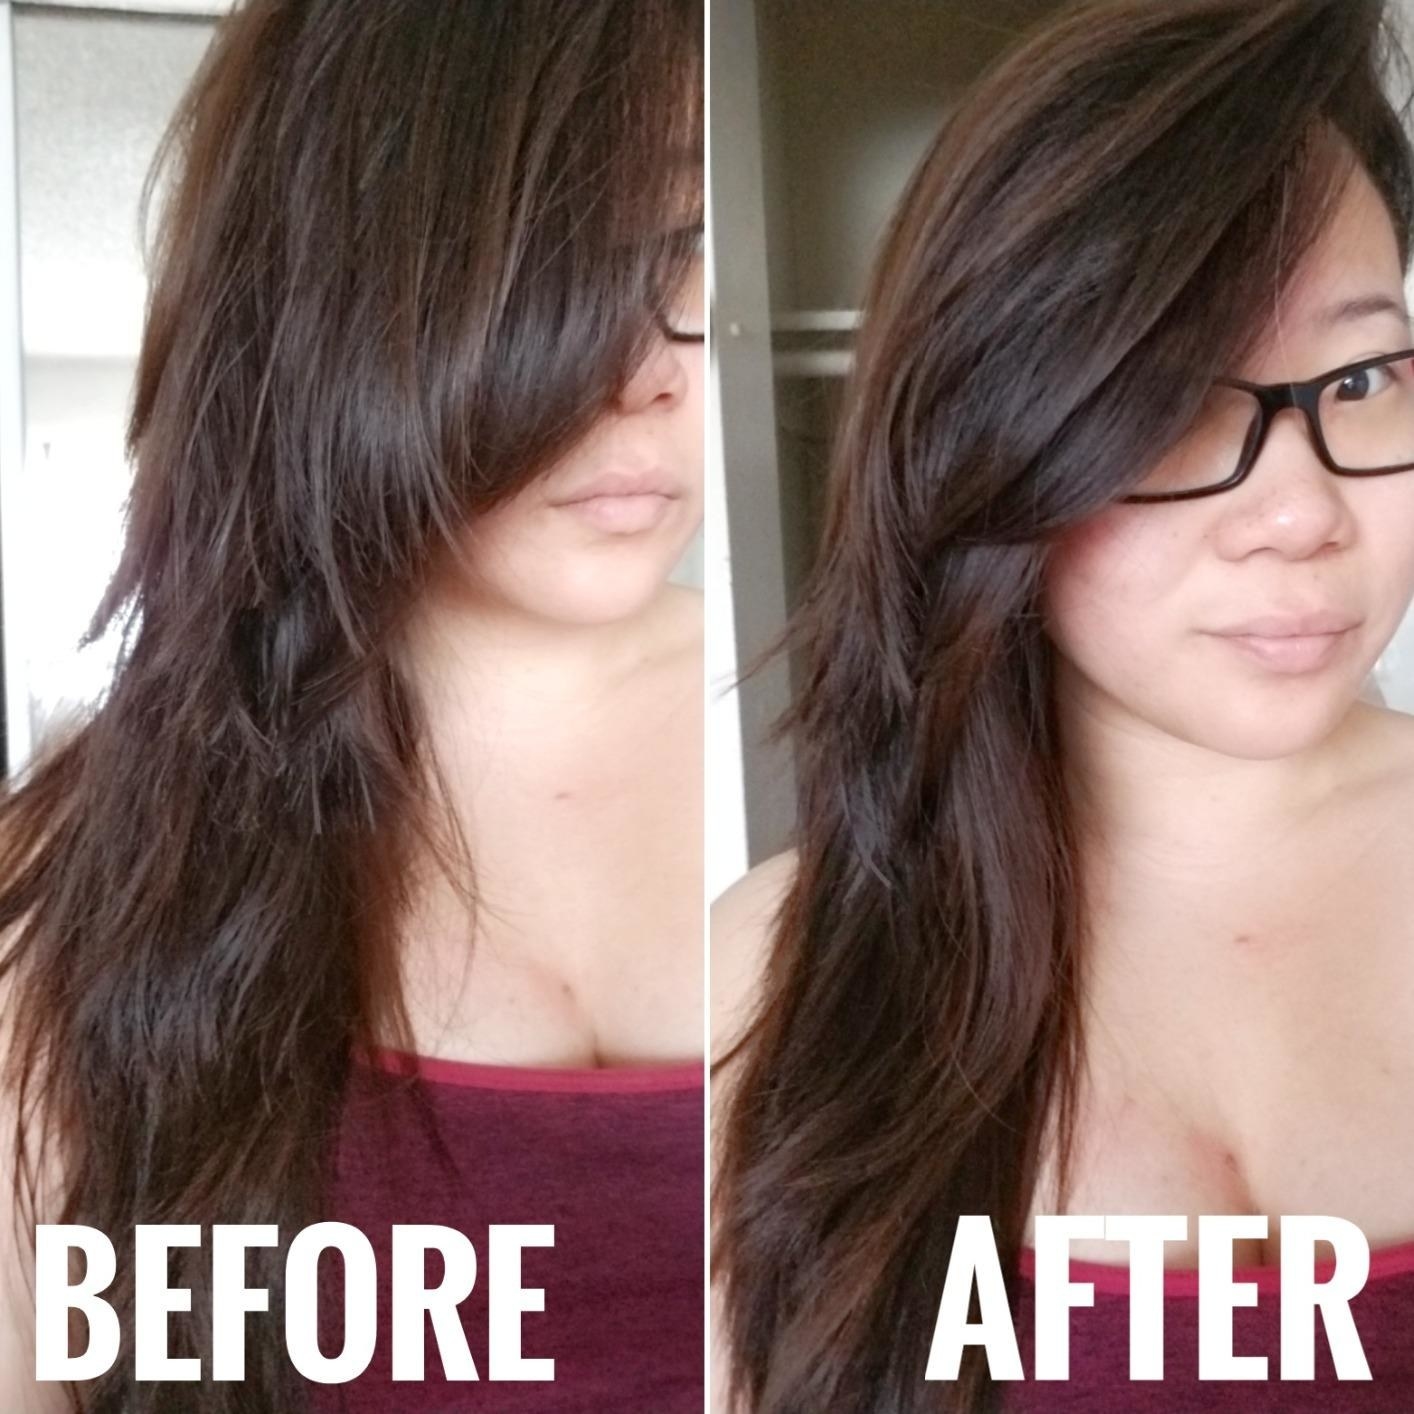 A before-and-after of a reviewer with dry, damaged hair and split ends compared to much healthier and smoother looking hair after using the serum 